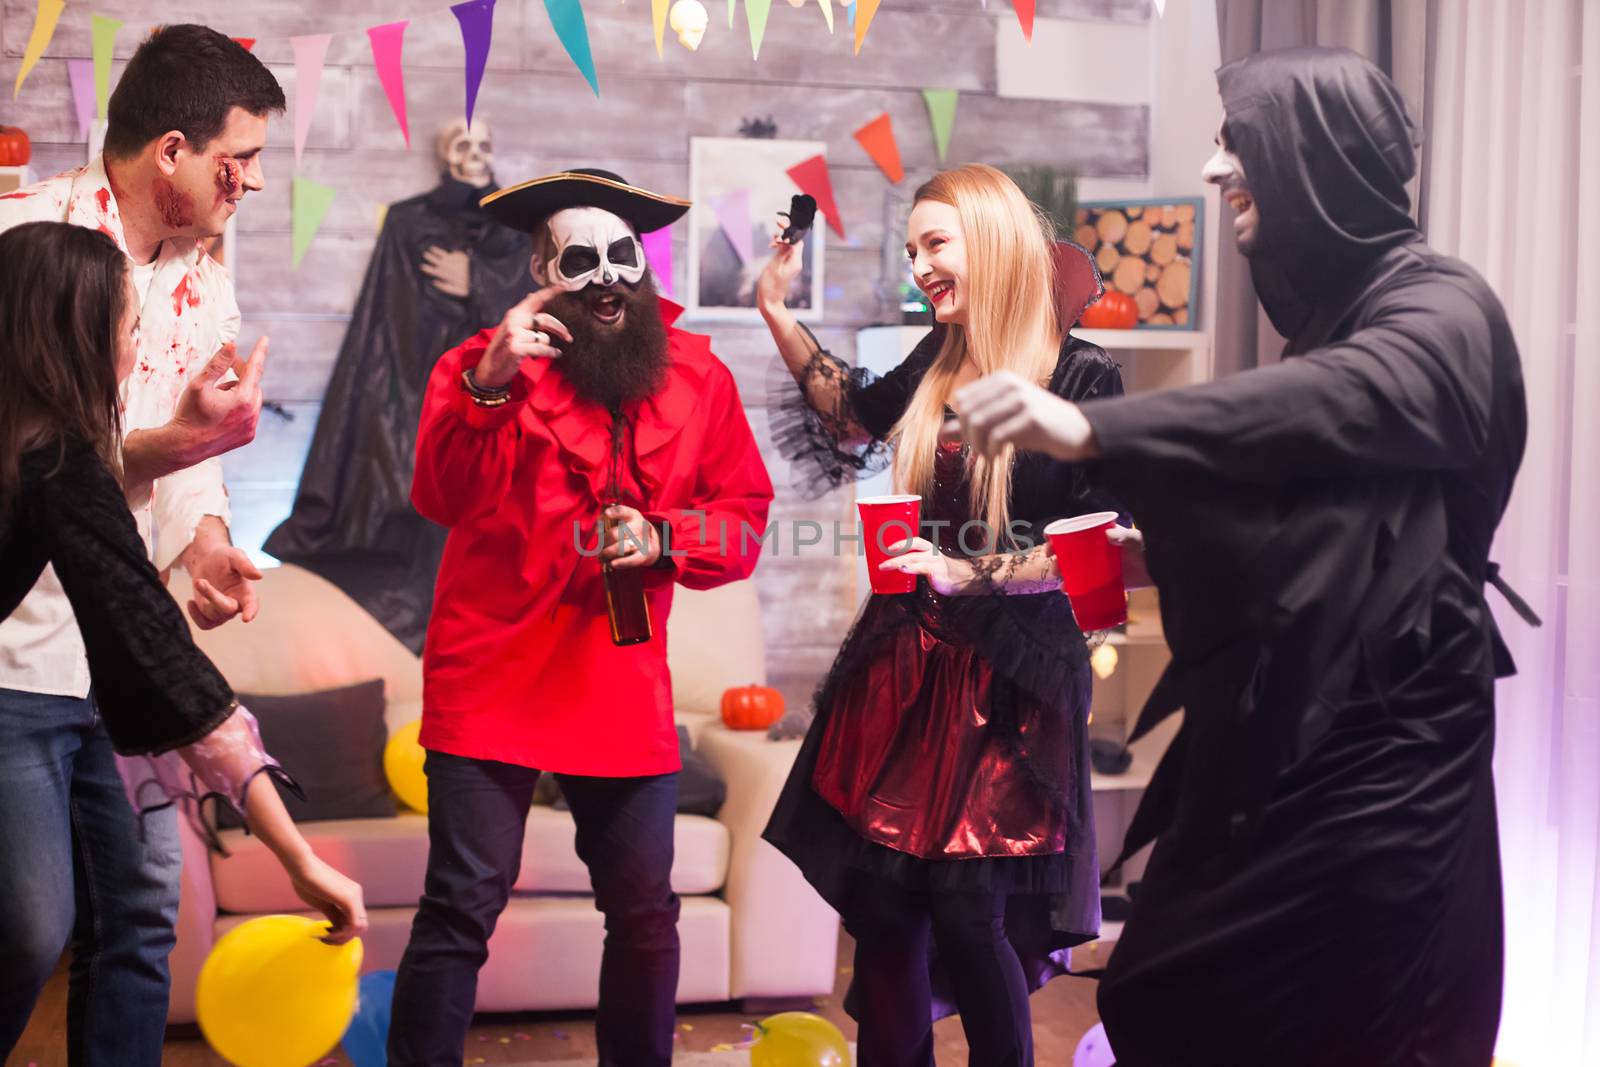 Grim reaper and pirate dancing while celebrating halloween by DCStudio